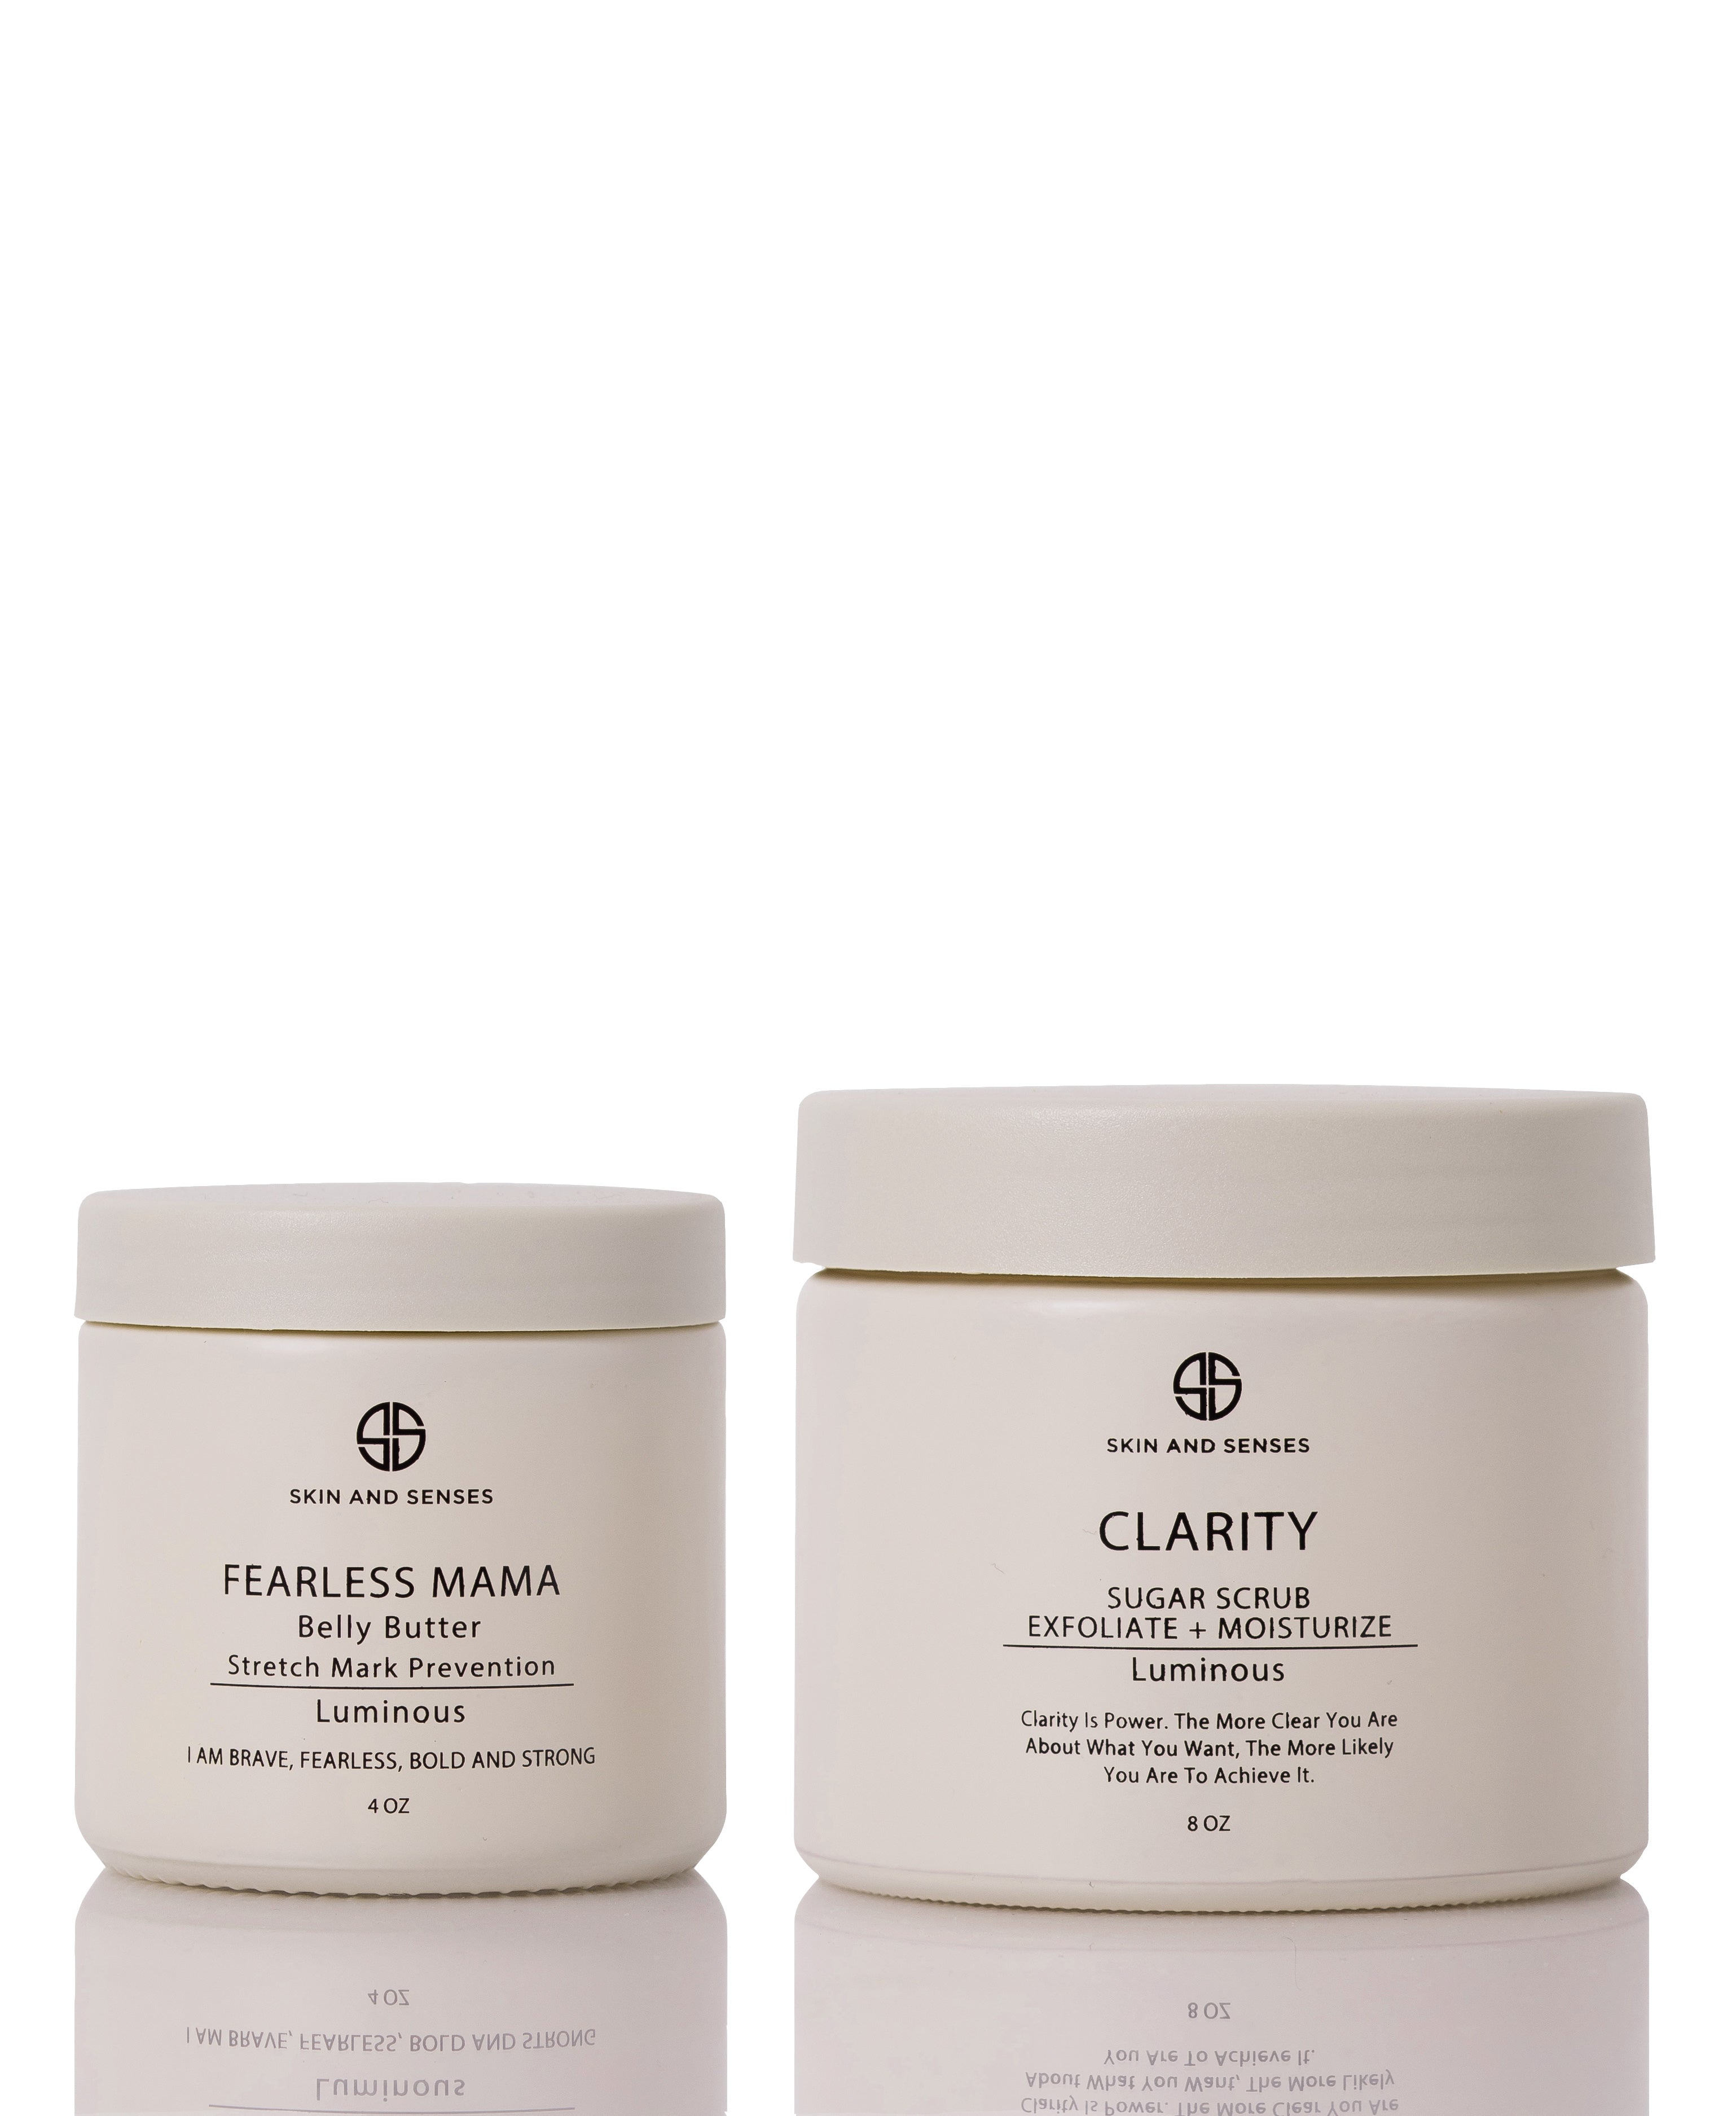 skin and senses fearless mama belly butter and clarity sugar scrub exfoliate and moisturize